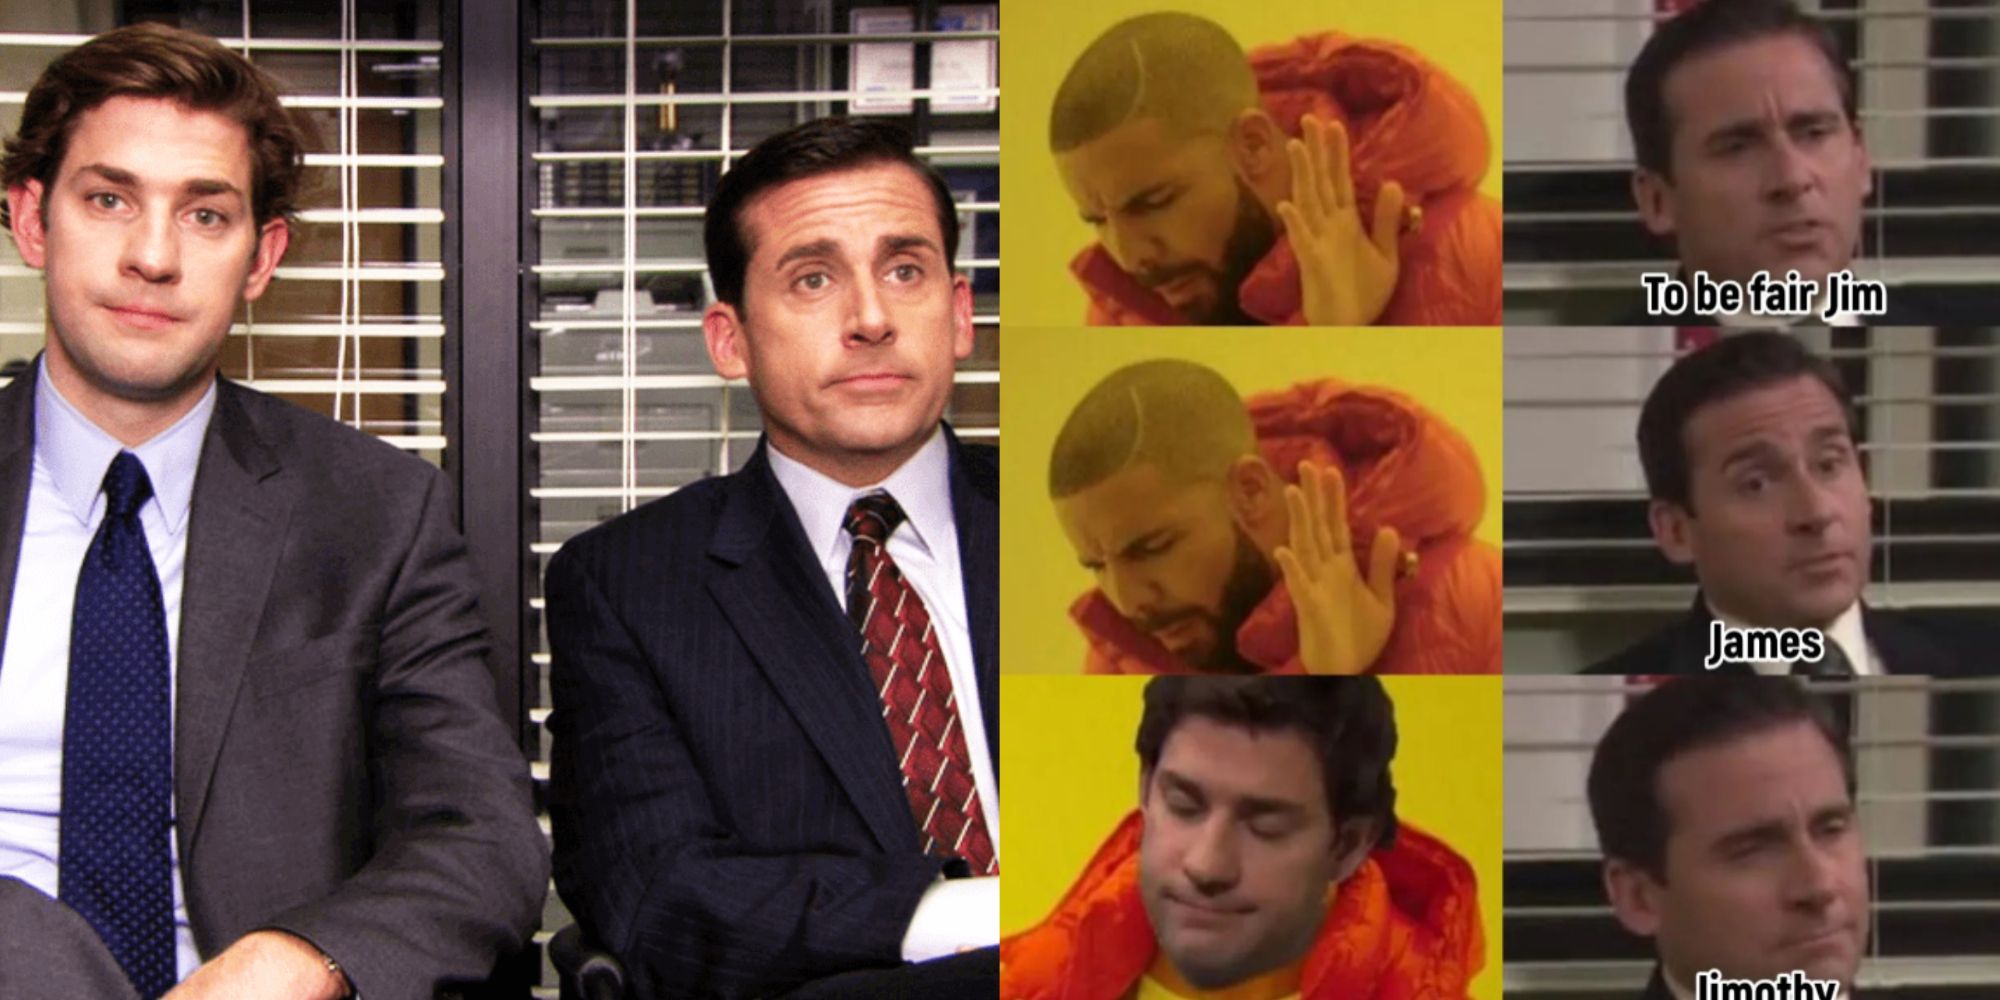 The Office: 9 Hilarious Memes That Sum Up Michael And Jim's Friendship